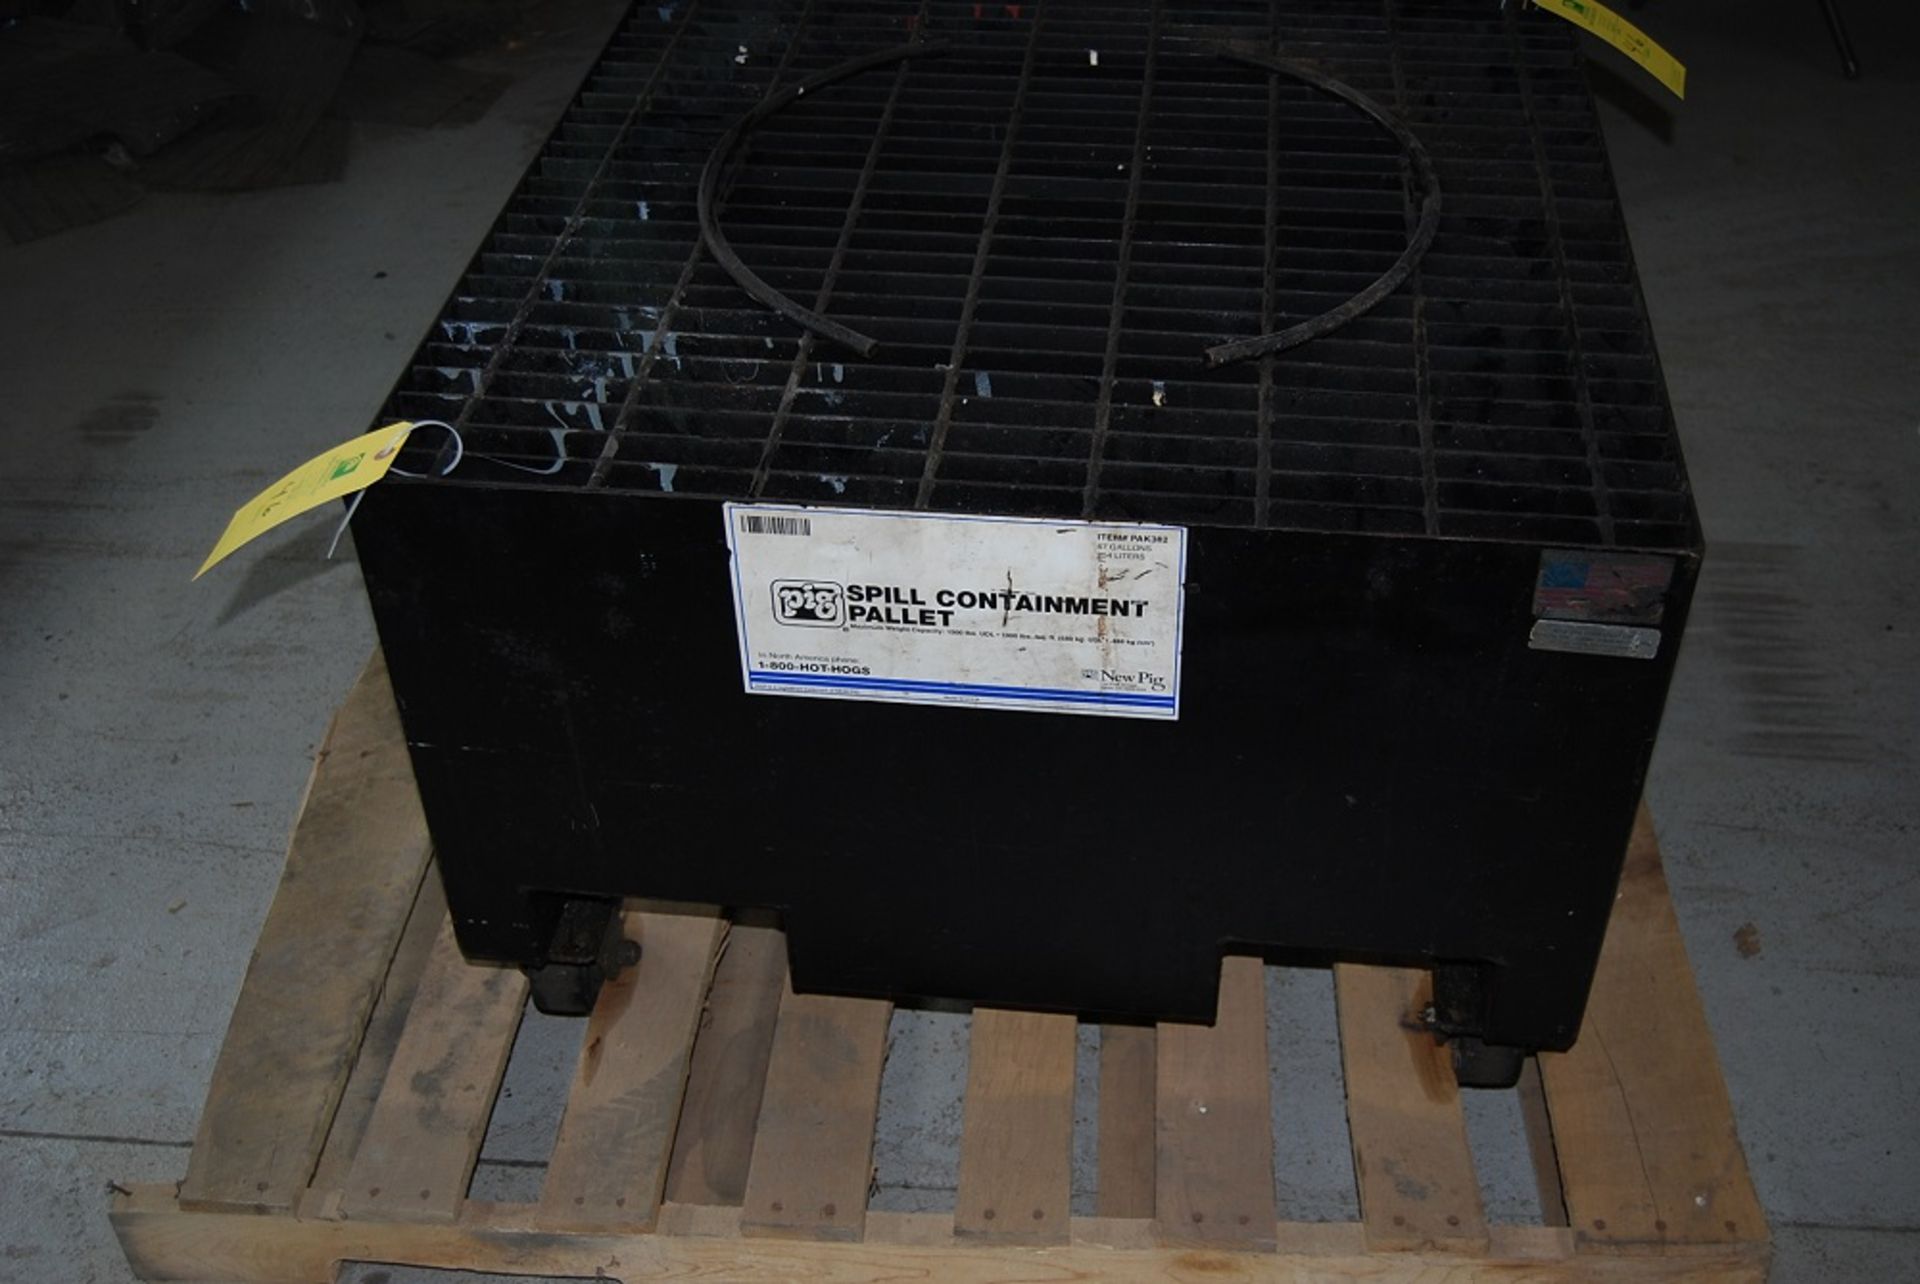 New Pig Spill Containment Pallet, Foot Print: 32.5" x 32.5" x 23" tall on casters - Image 2 of 5